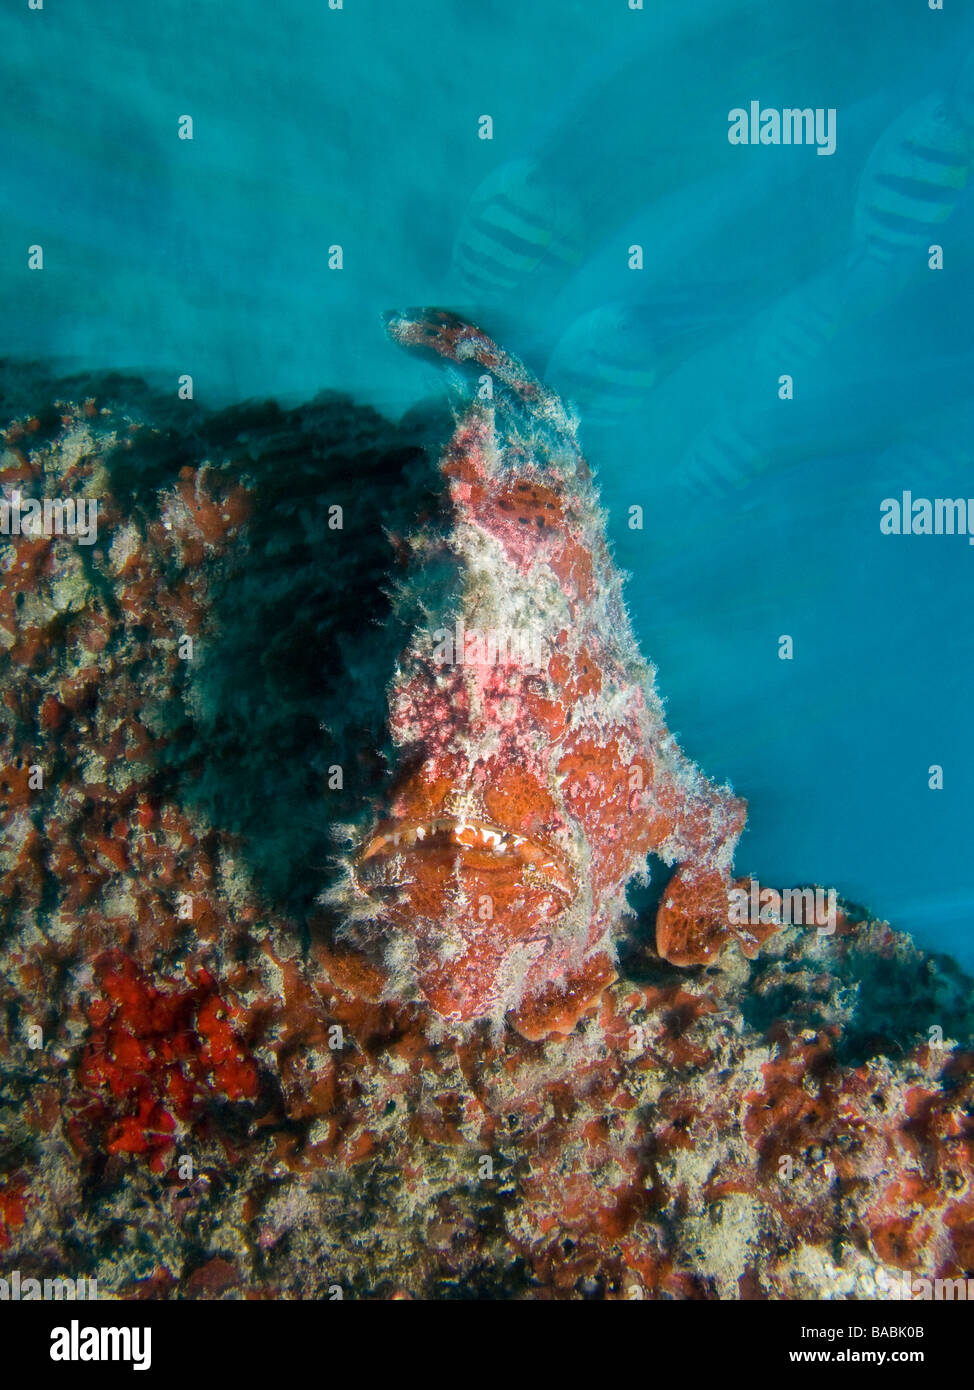 Red Giant frogfish on blurred blue background. Stock Photo